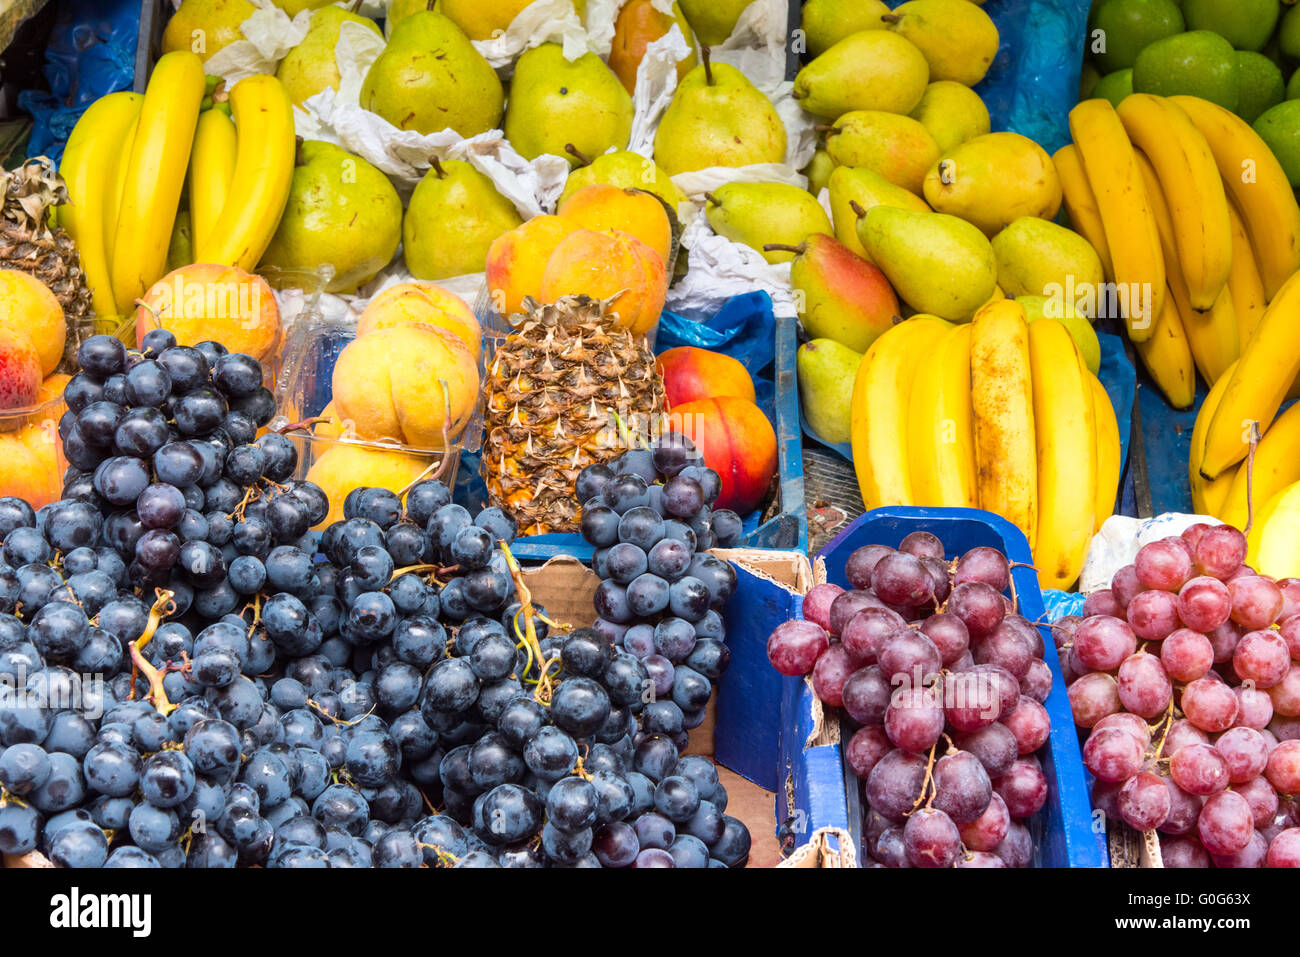 Fresh fruits for sale at a market Stock Photo